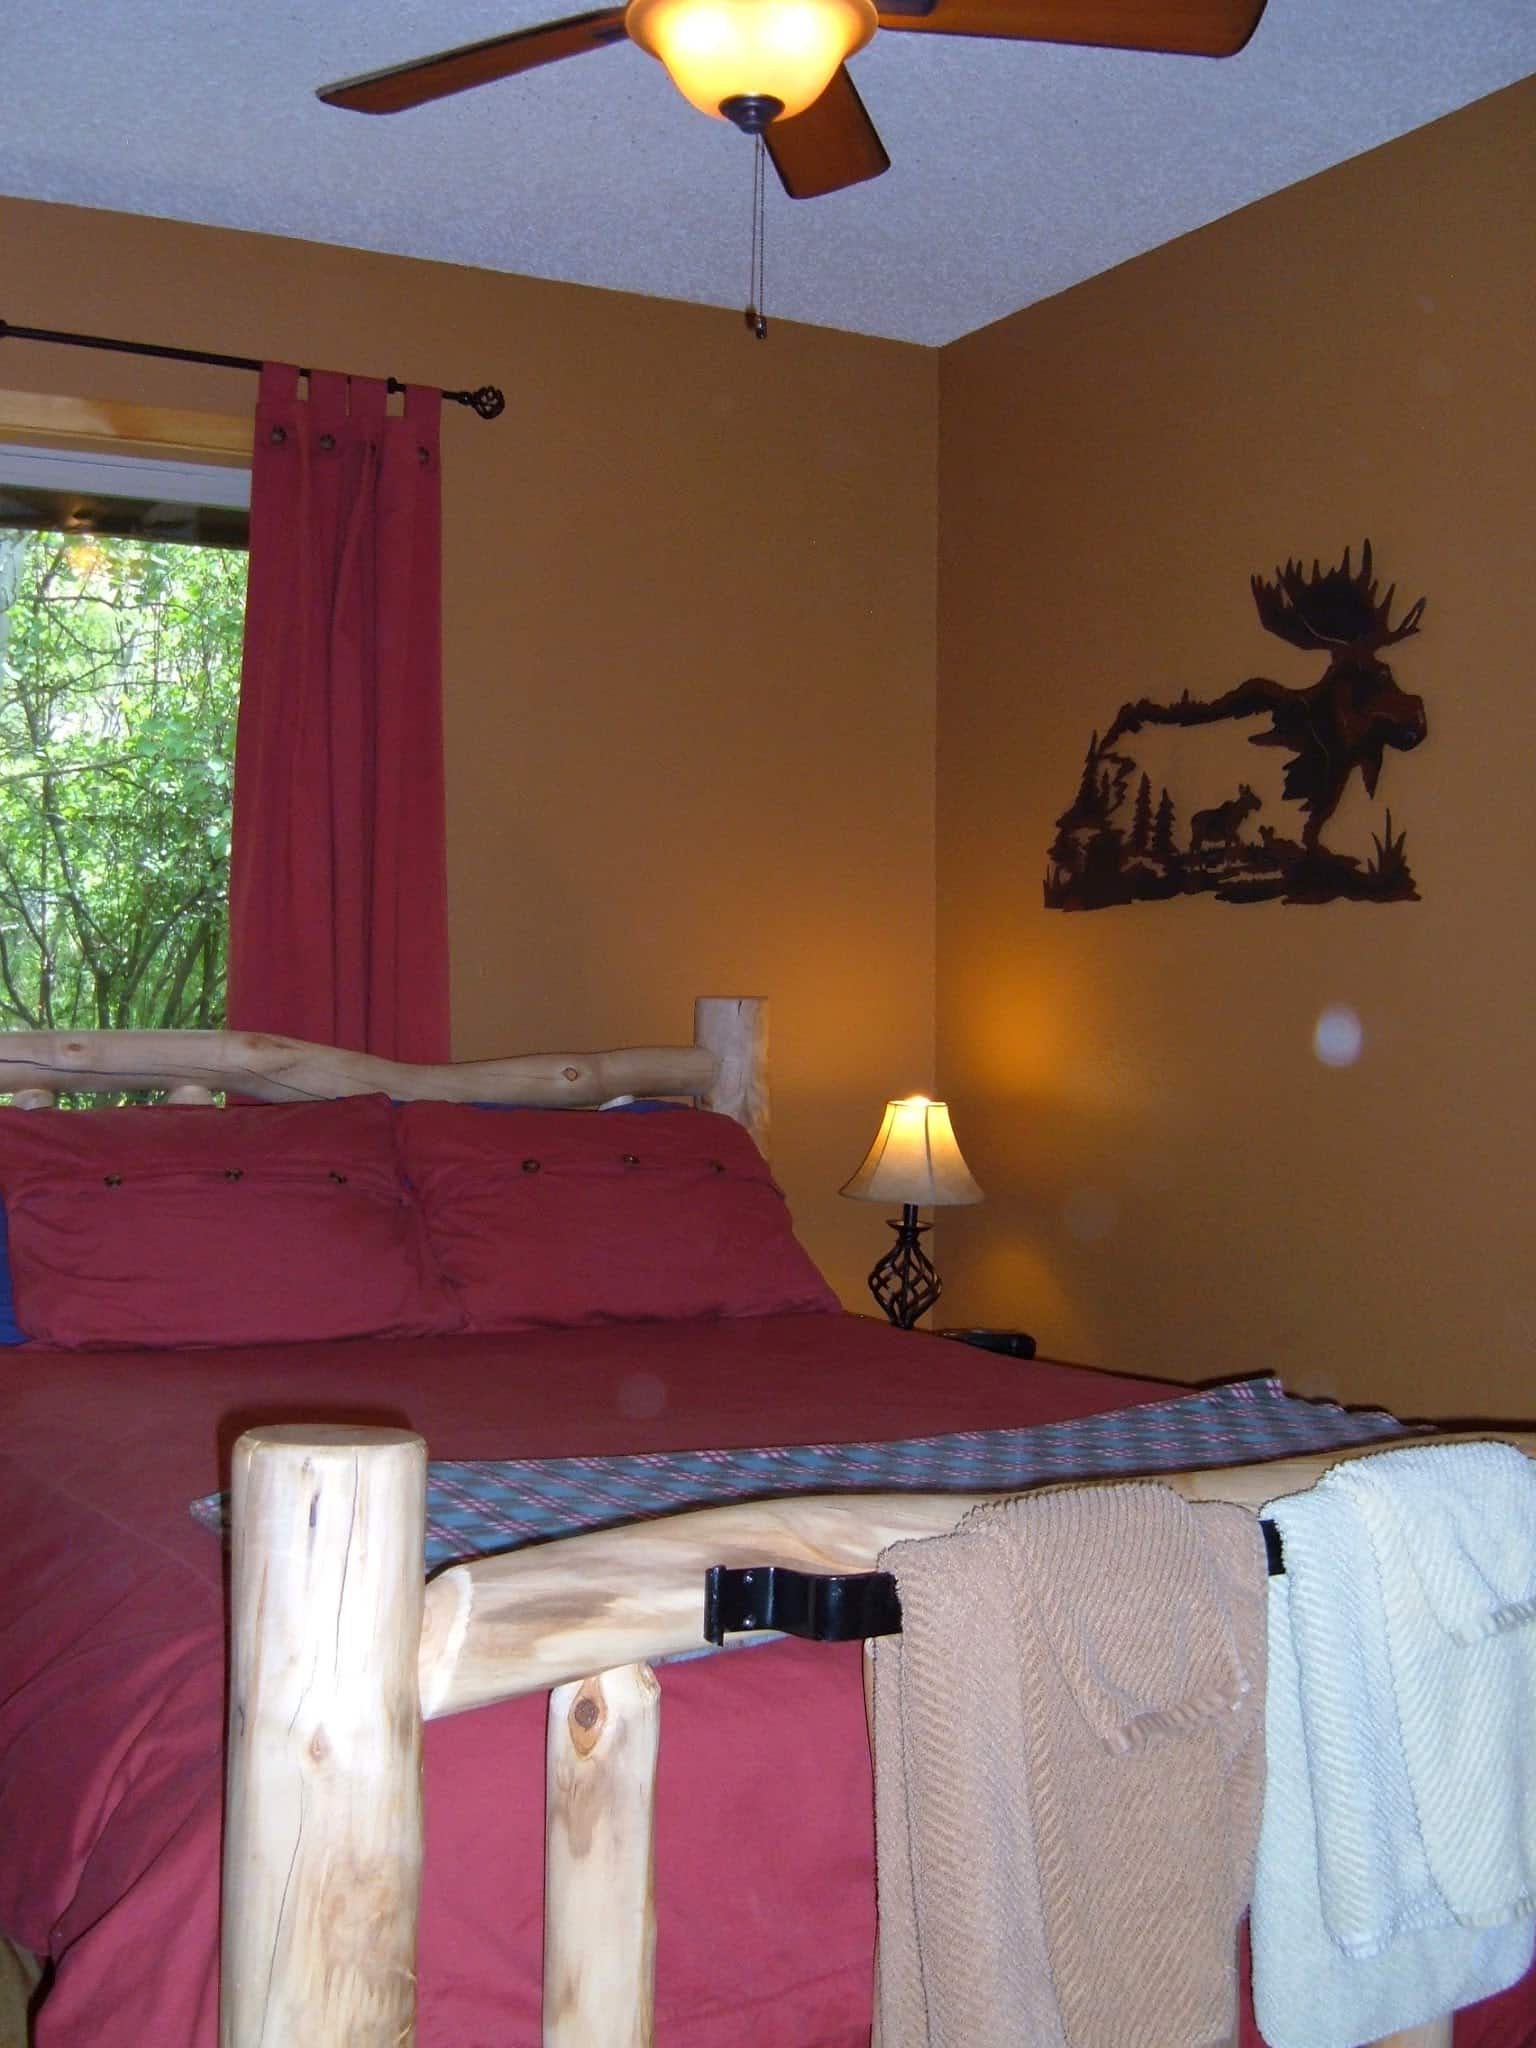 Charming log bed with a red duvet comforter, brown walls, metal art work of a moose on the wall, bed lamp, and a ceiling fan. Brown and green towel sets hanging on a rod iron towel bar at the foot of the bed.